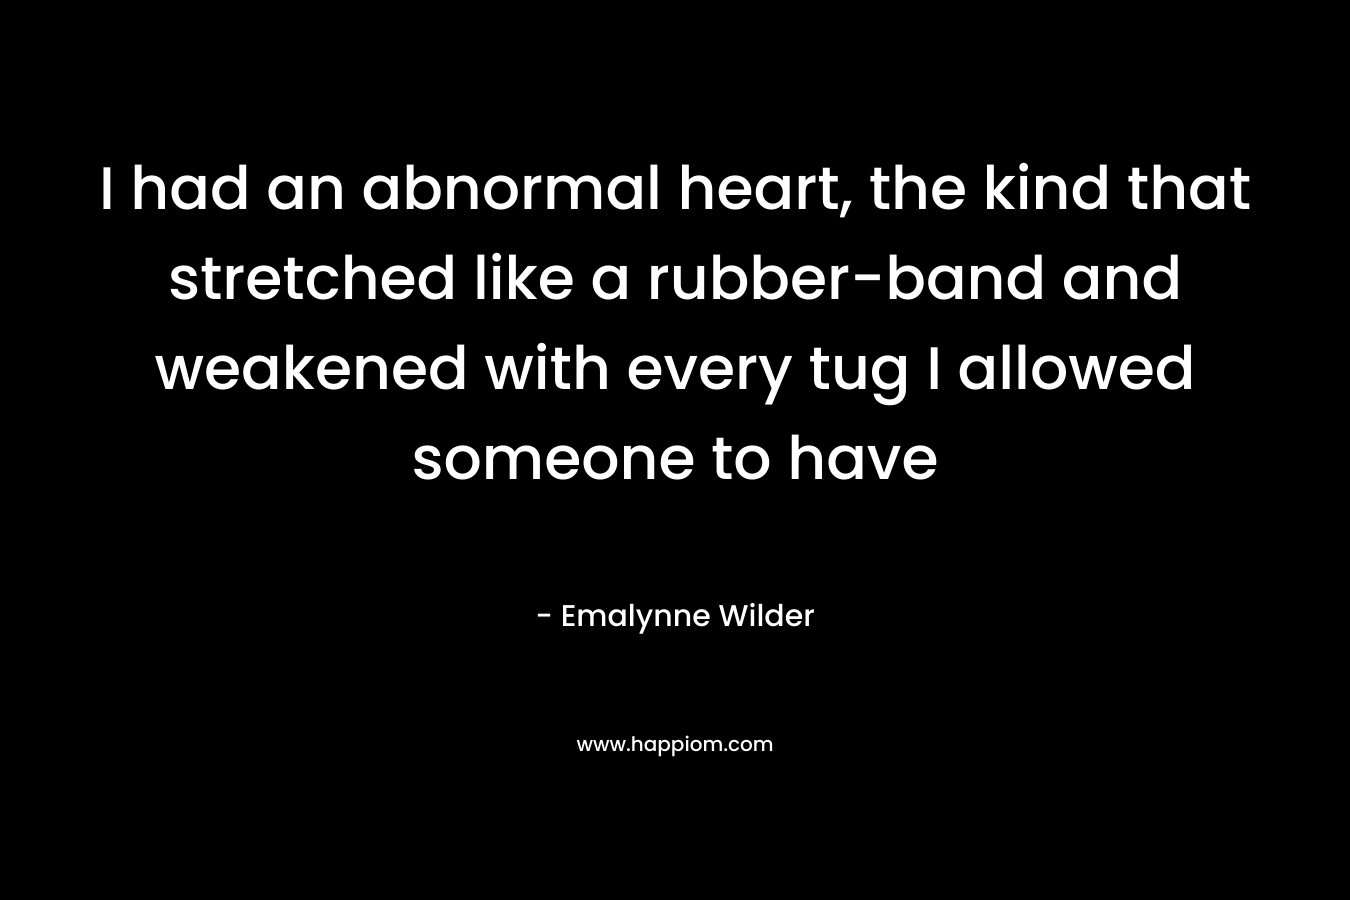 I had an abnormal heart, the kind that stretched like a rubber-band and weakened with every tug I allowed someone to have